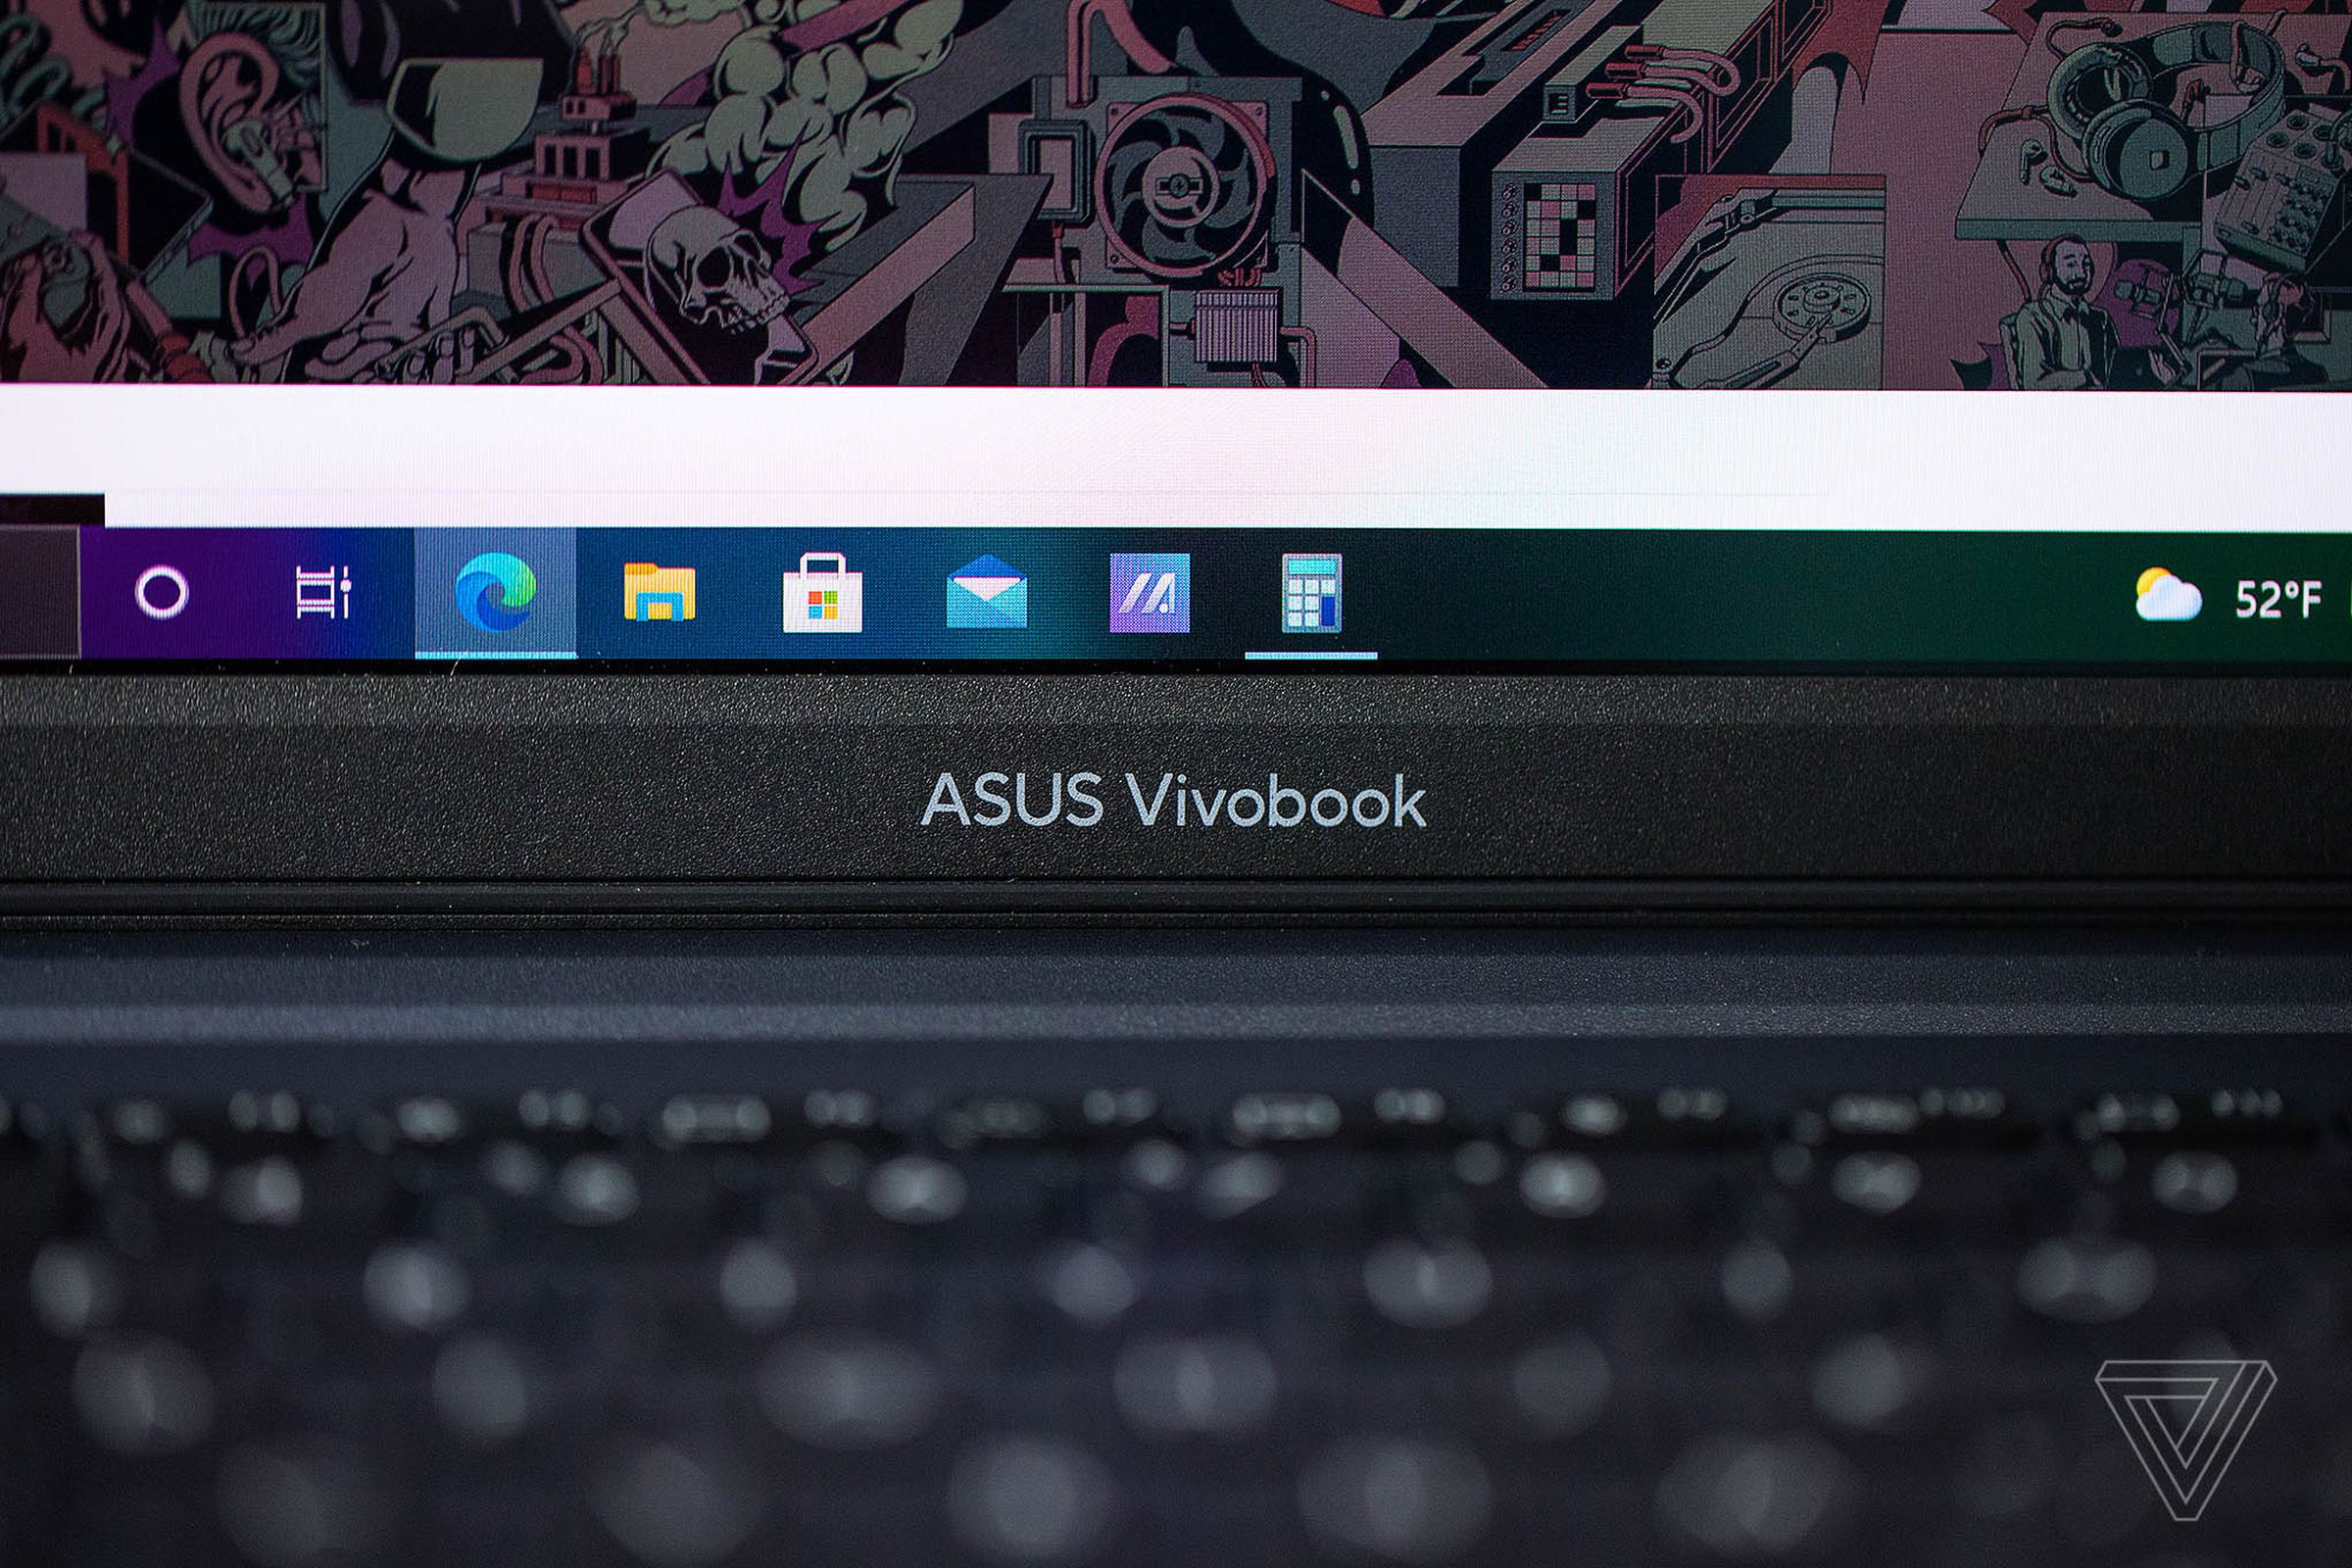 The Asus Vivobook logo on the bottom bezel of the Asus Vivobook Pro 14, up close.